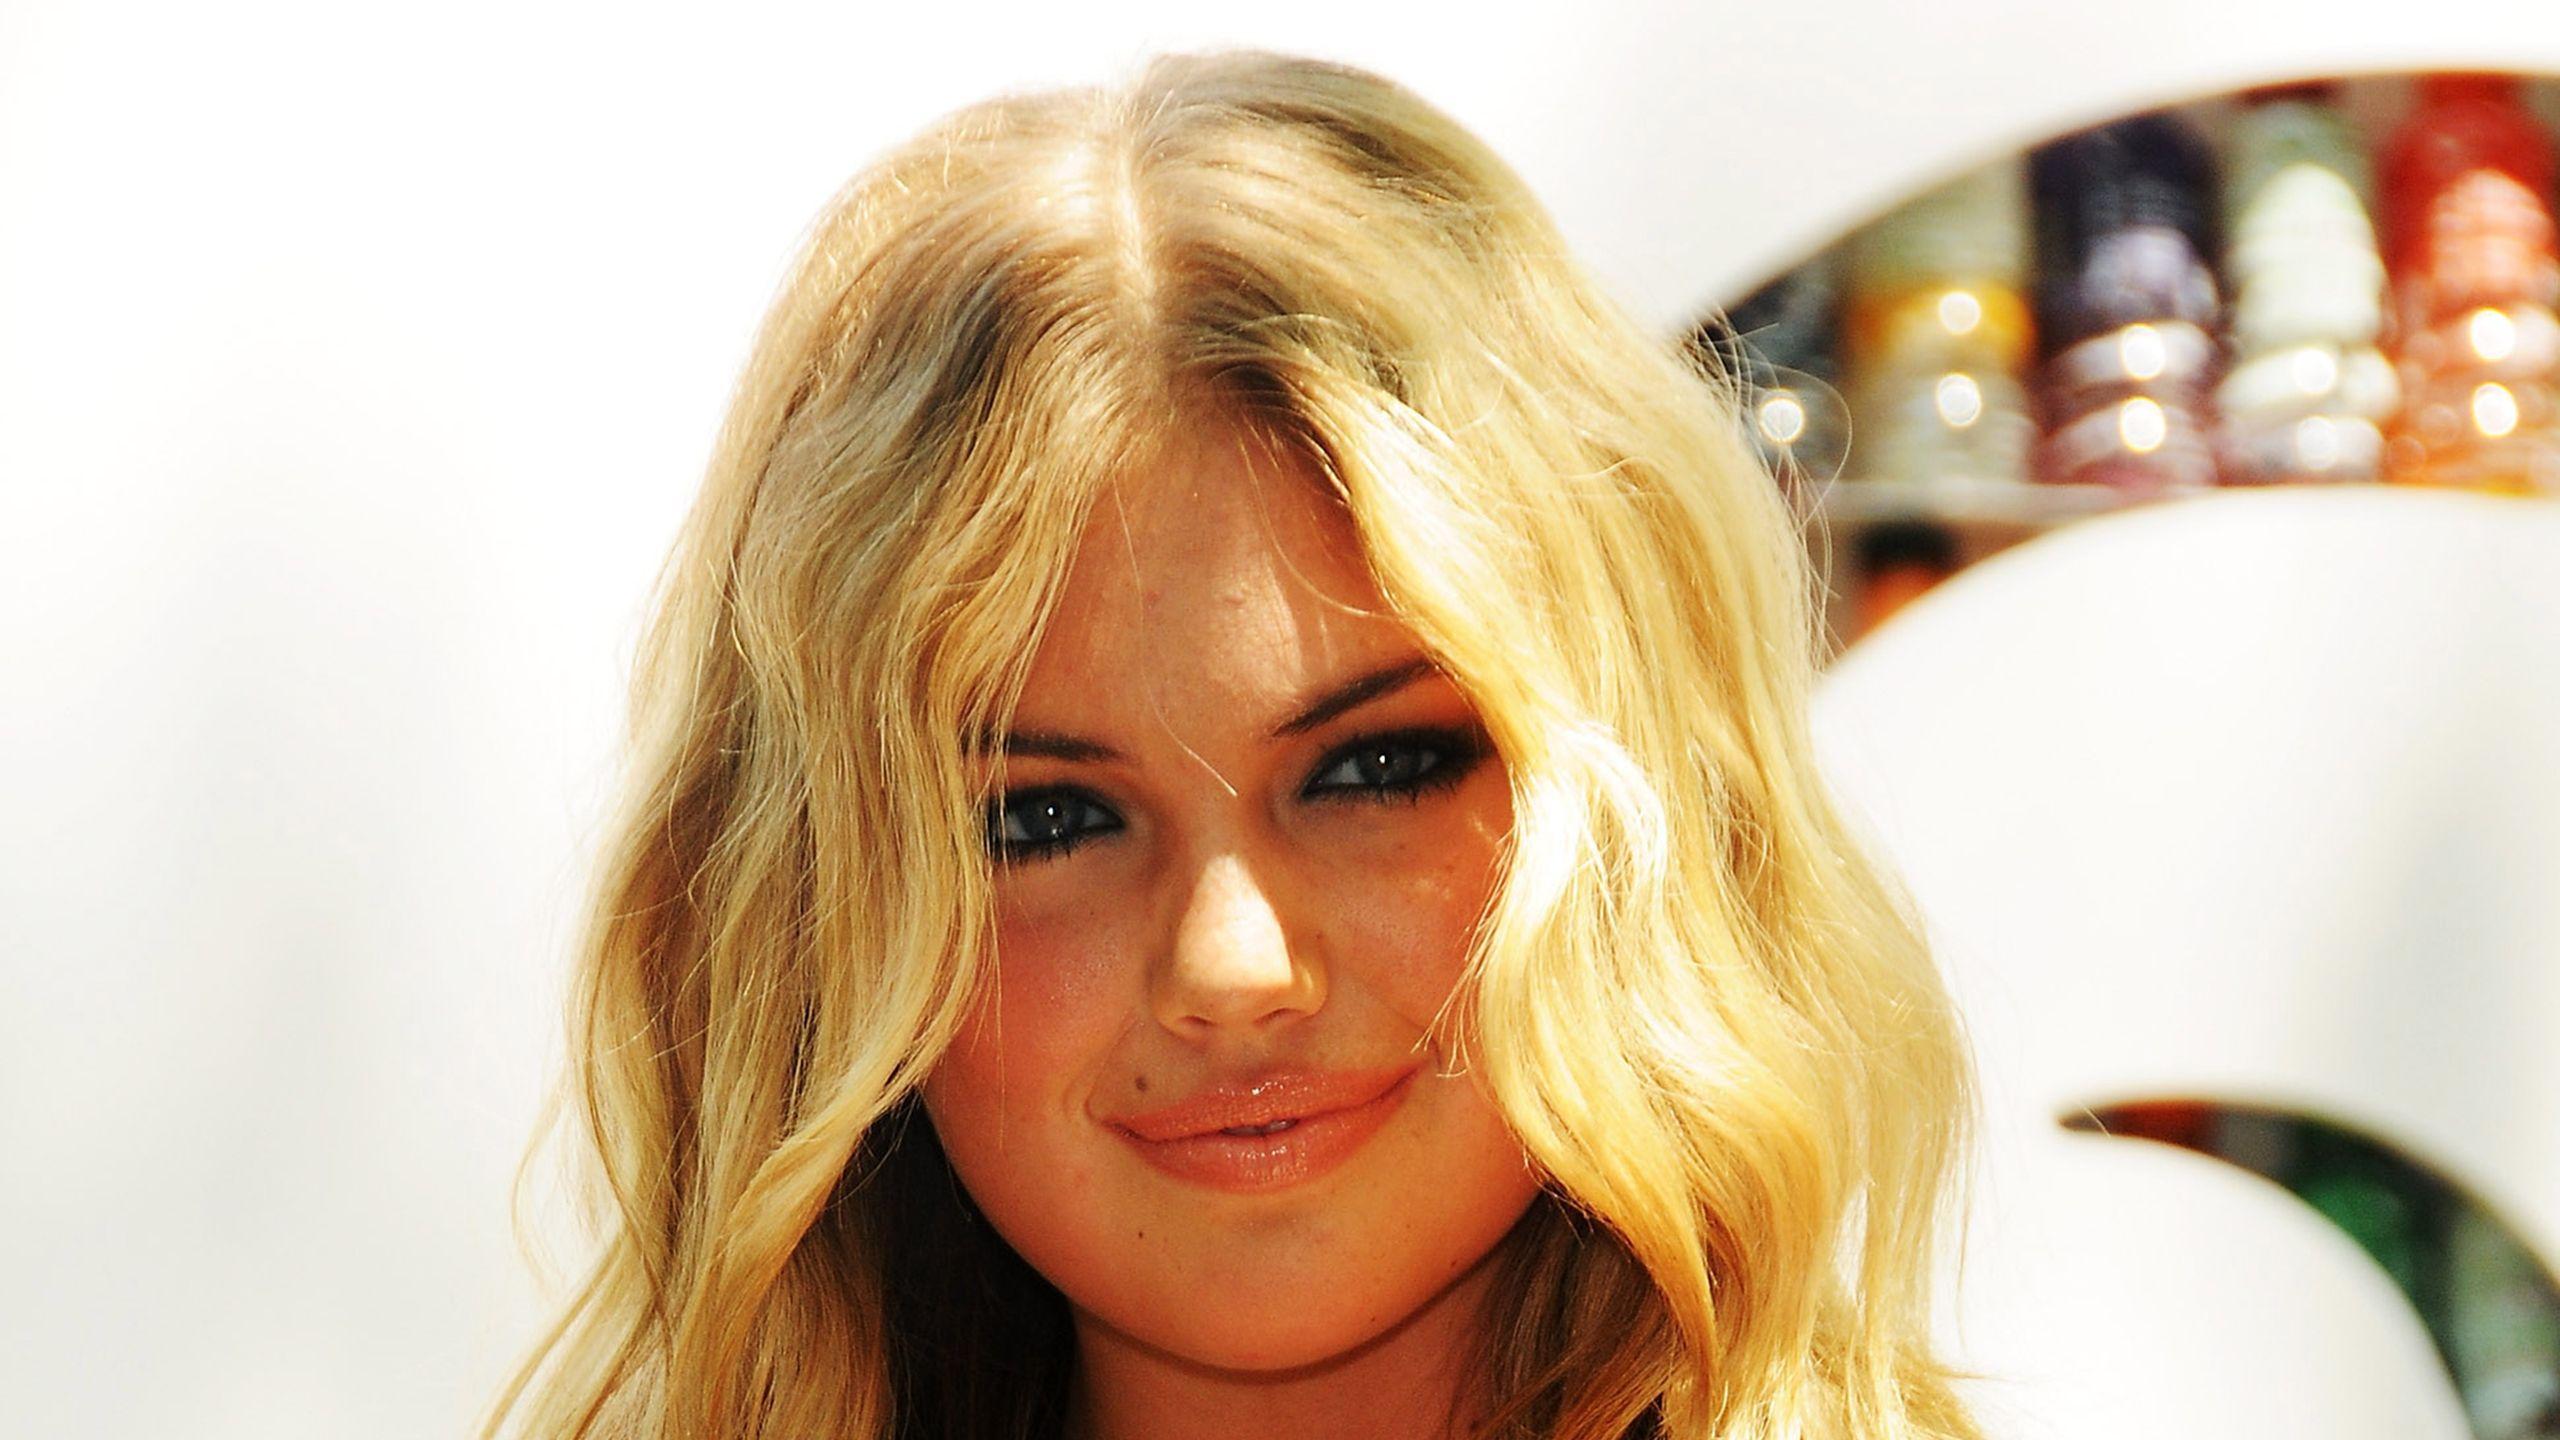 Kate Upton. Free Desktop Wallpaper for Widescreen, HD and Mobile